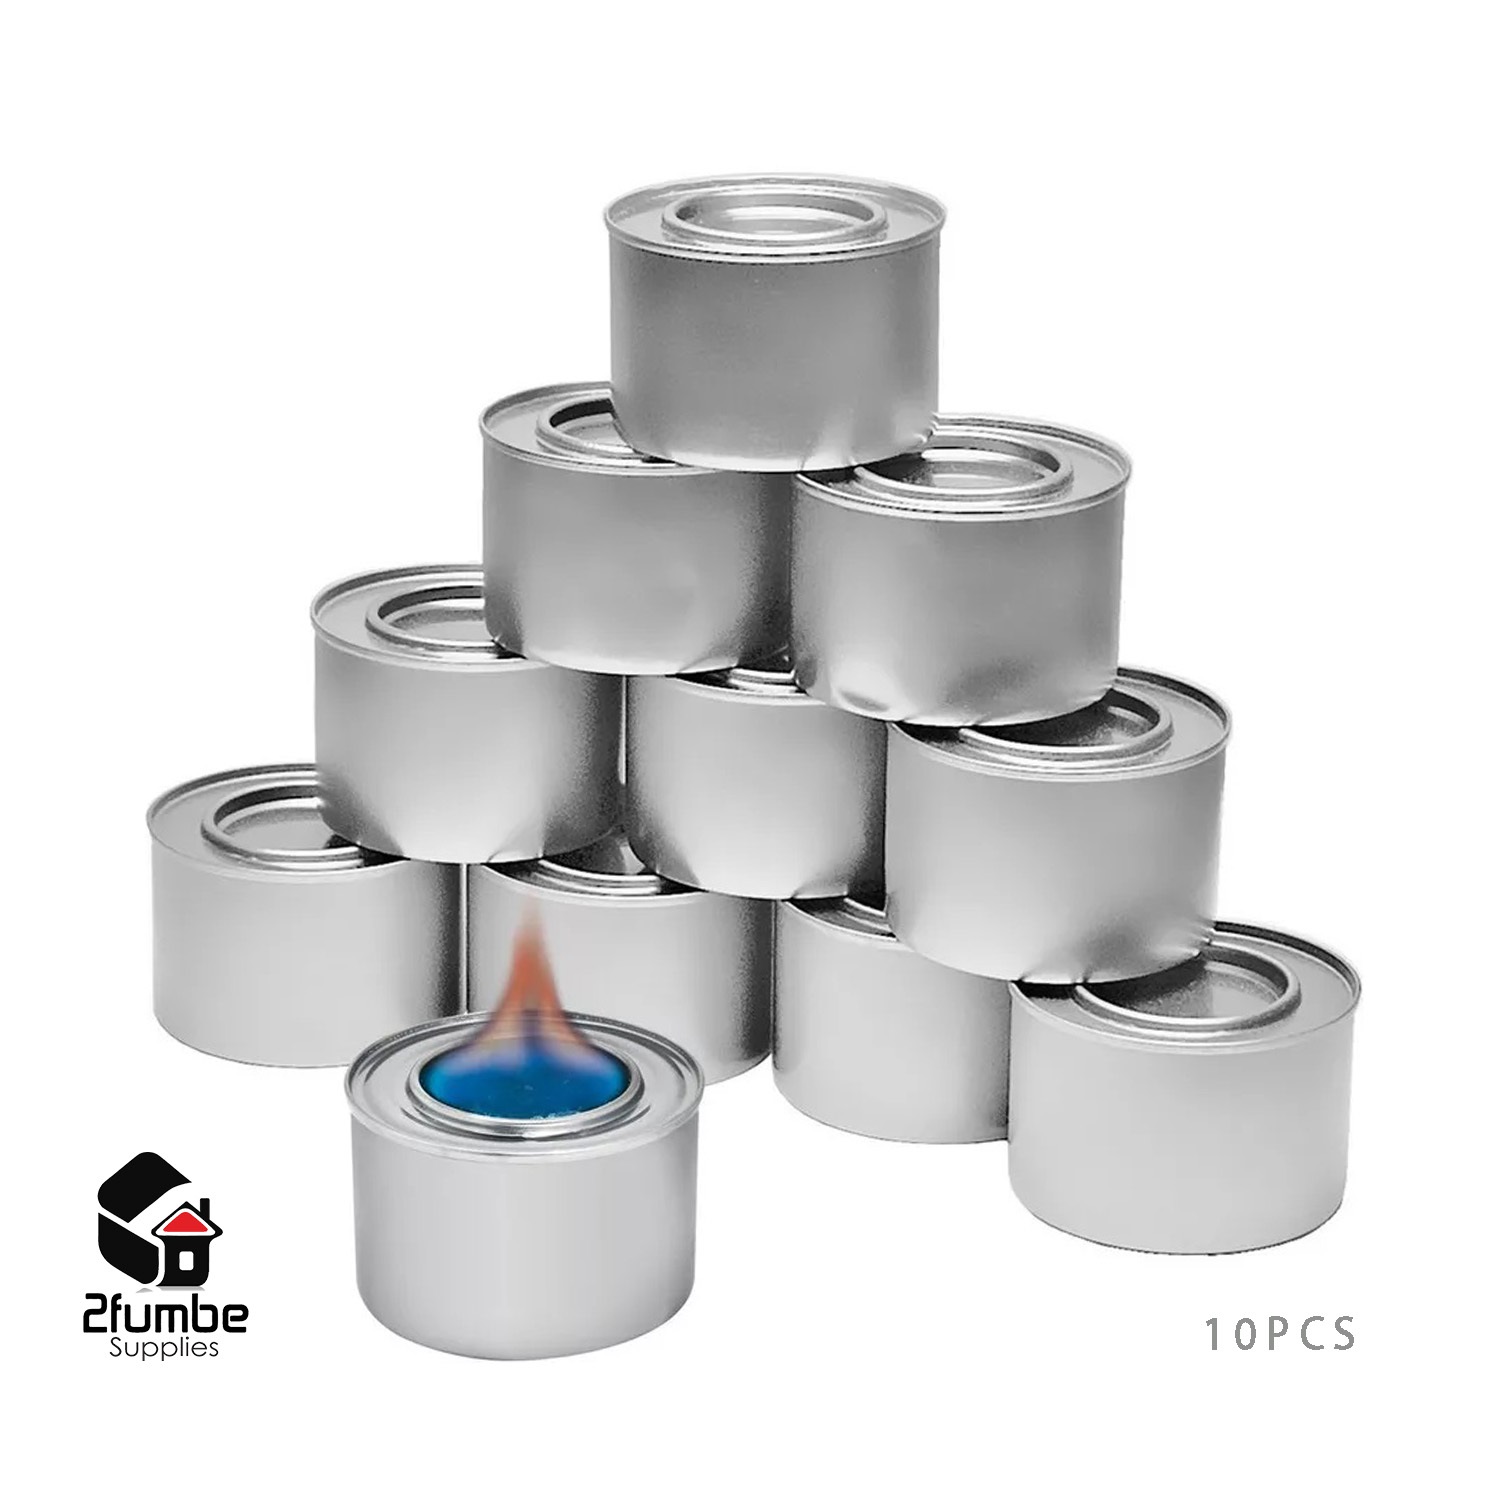 GC04-Gel fuel chaffing cans-2fumbe cooking fuel